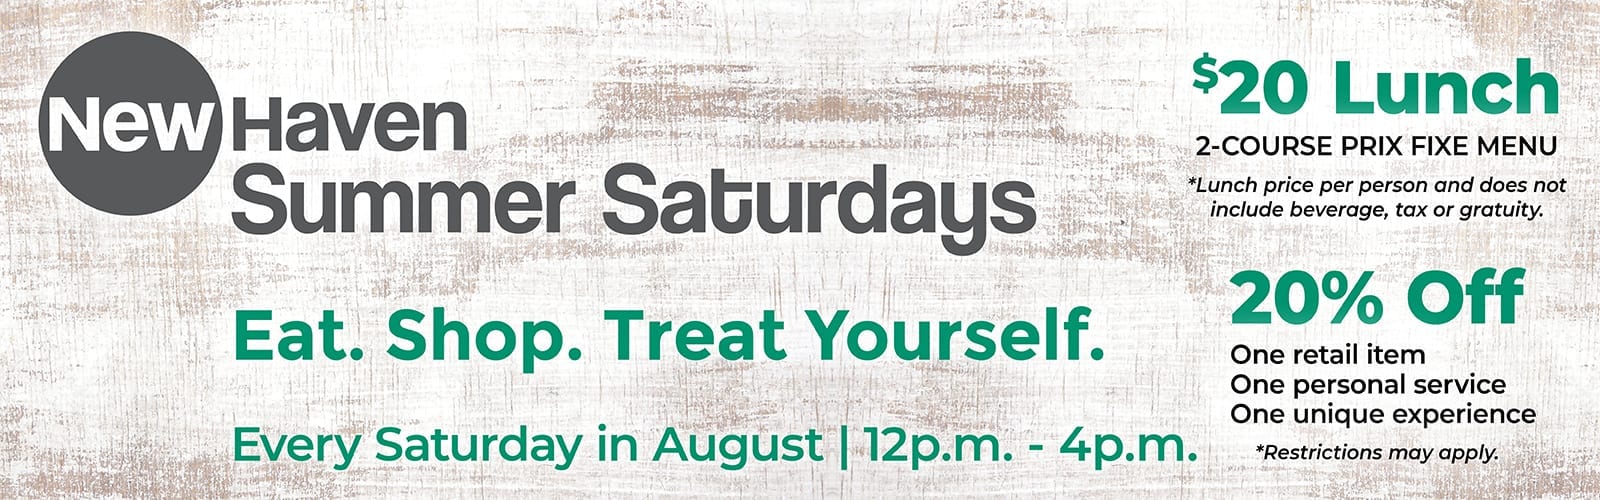 Summer Saturdays in New Haven – Shopping & Dining Celebration